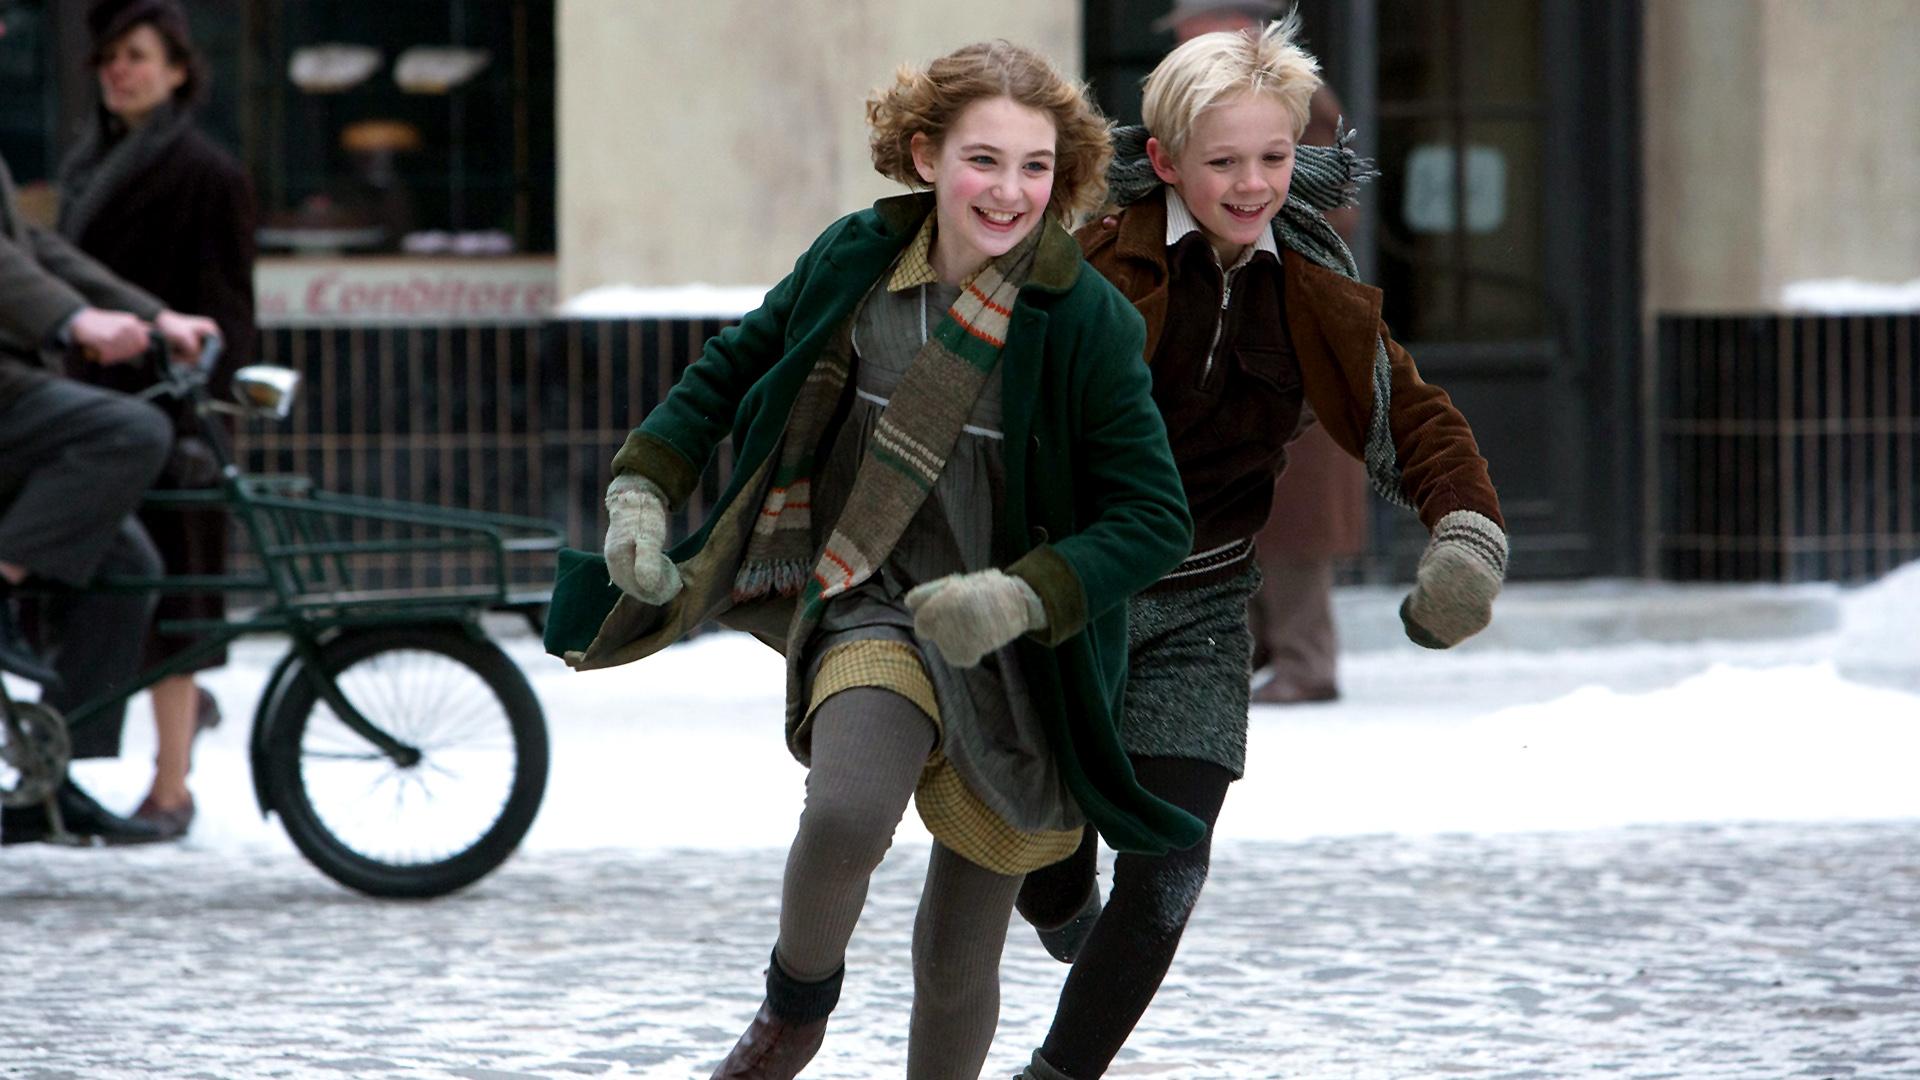 The movie was the book. Лизель Мемингер. The book Thief (2013).